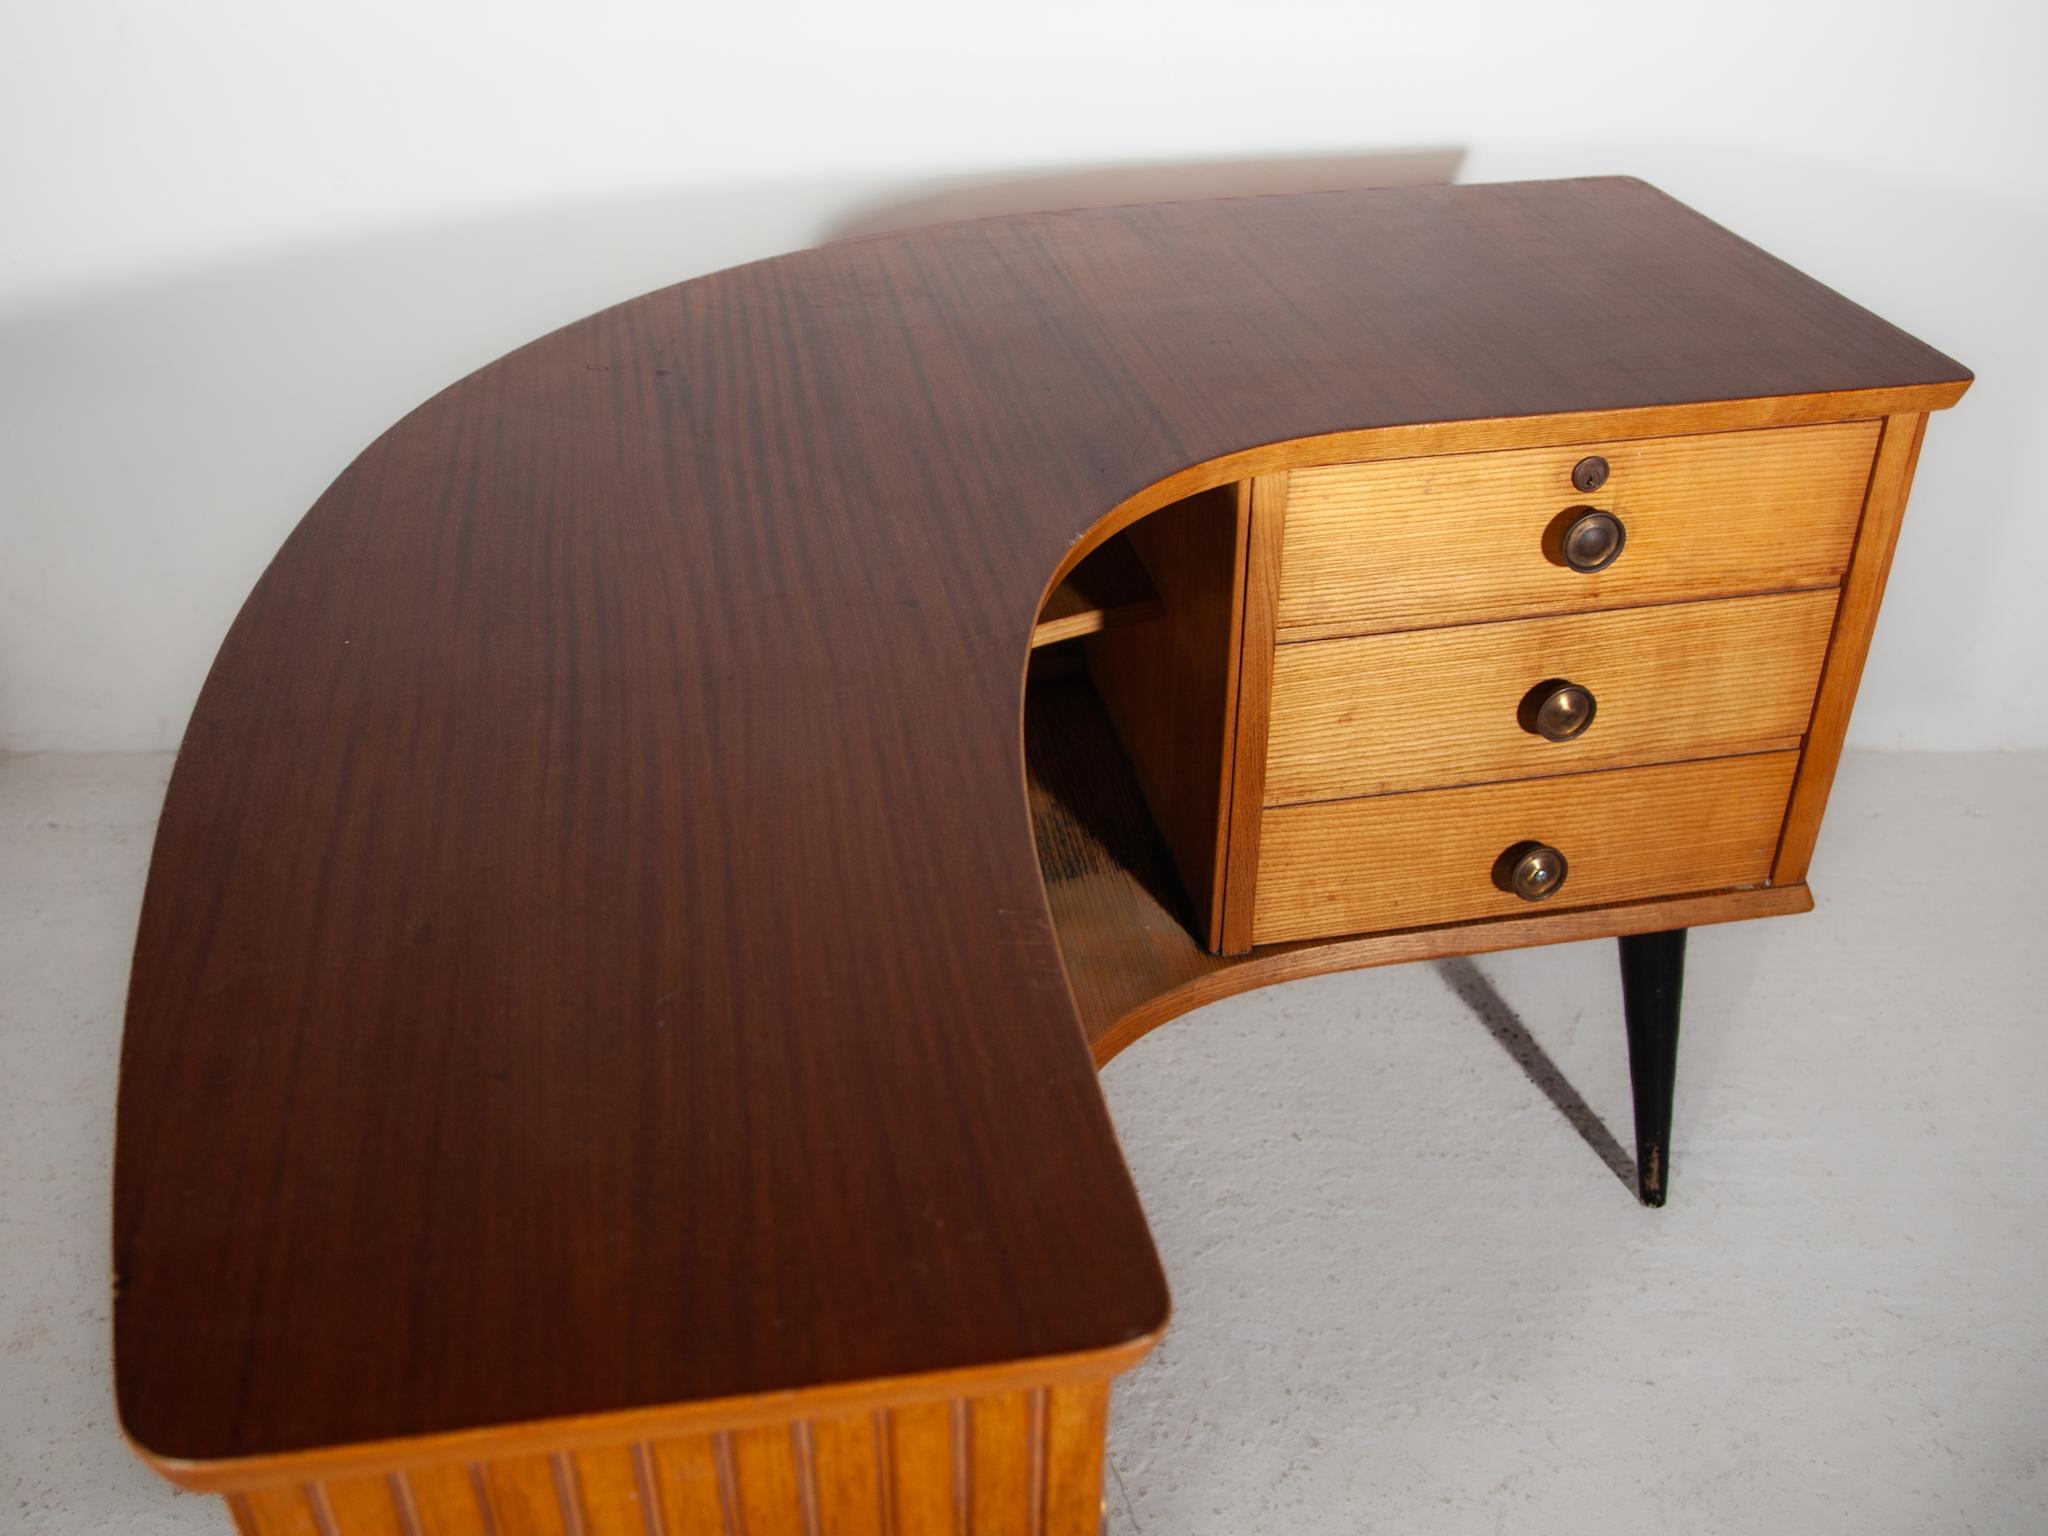 Boomerang Shaped Desk, Shop Counter, 1950s by Alfred Hendrickx For Sale 5